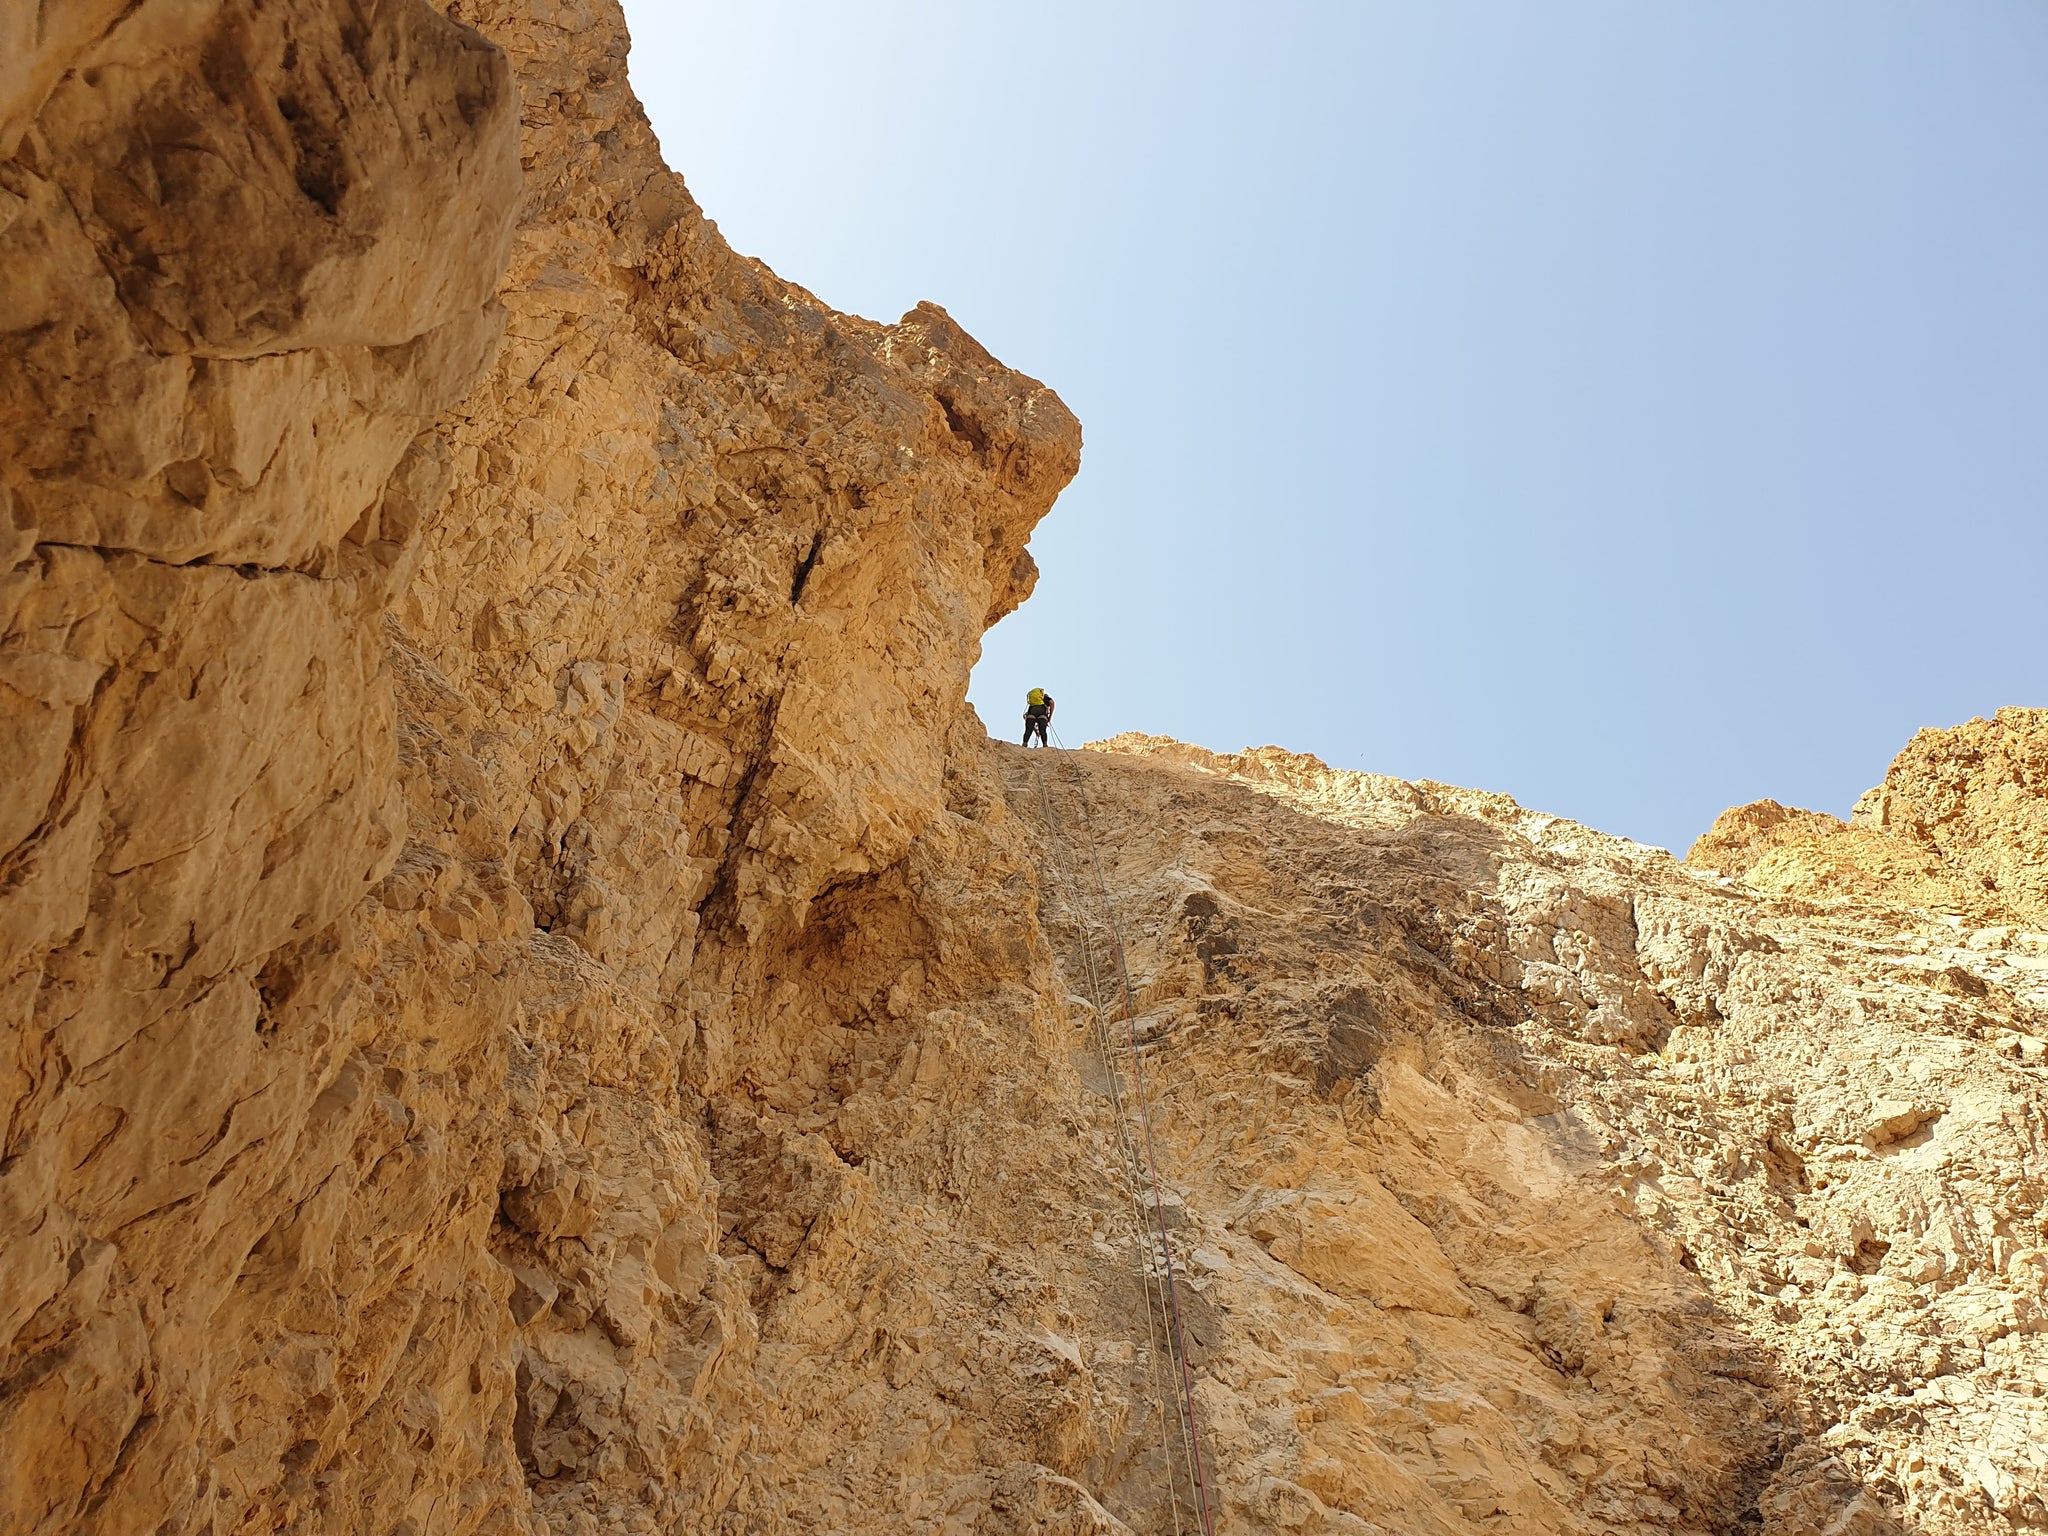 Rappelling experience in Qumran National Park